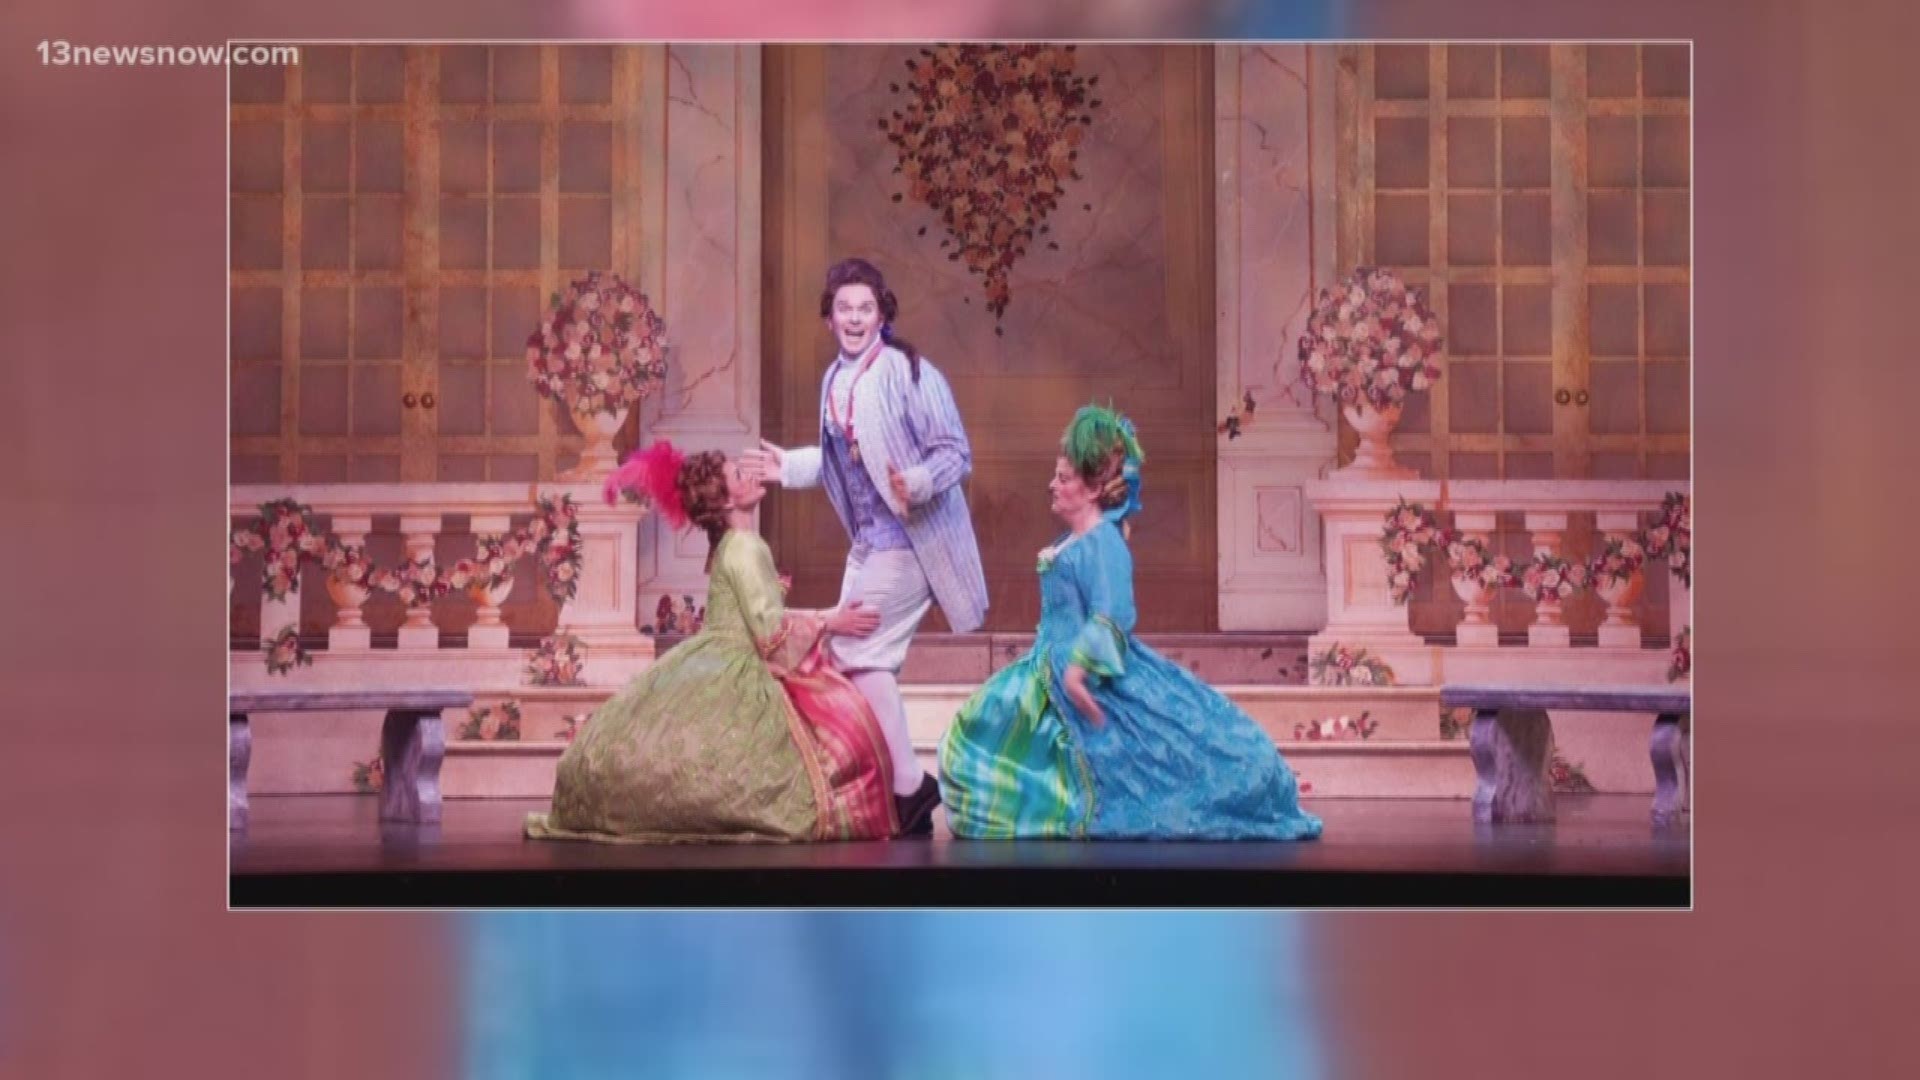 The Virginia Opera will perform 'Cinderella' at the Harrison Opera House later this month.